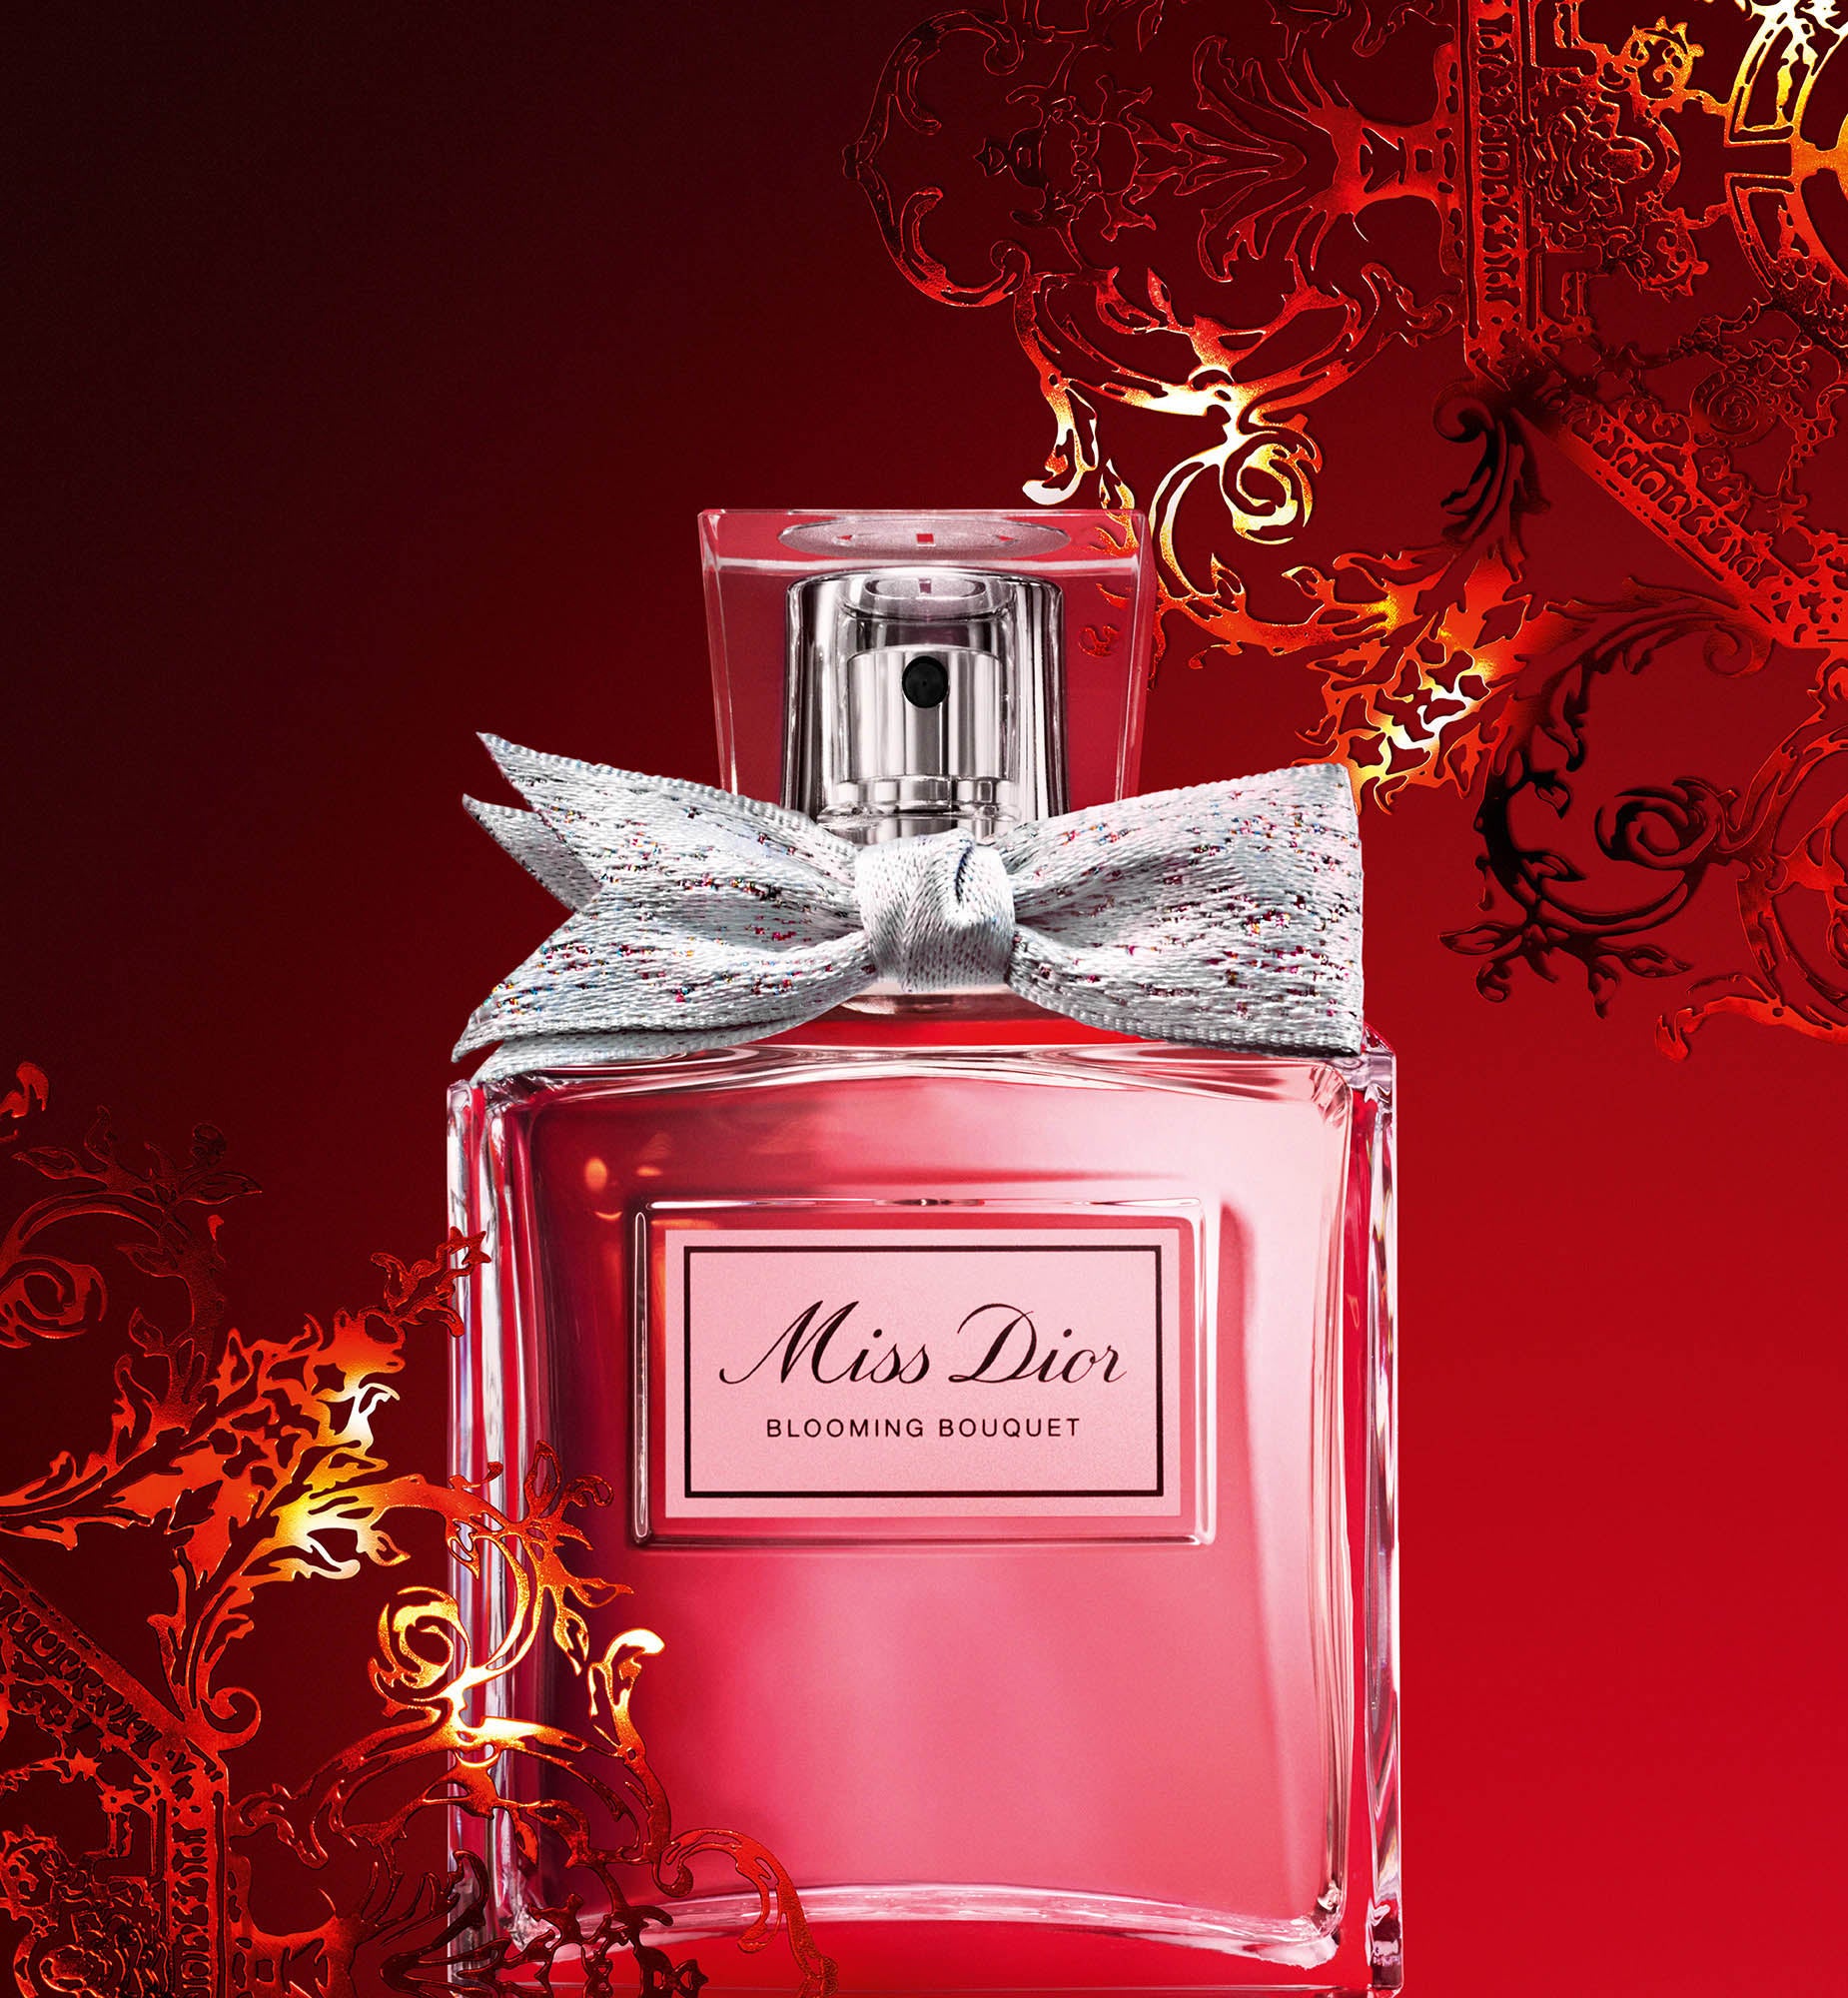 MISS DIOR BLOOMING BOUQUETE